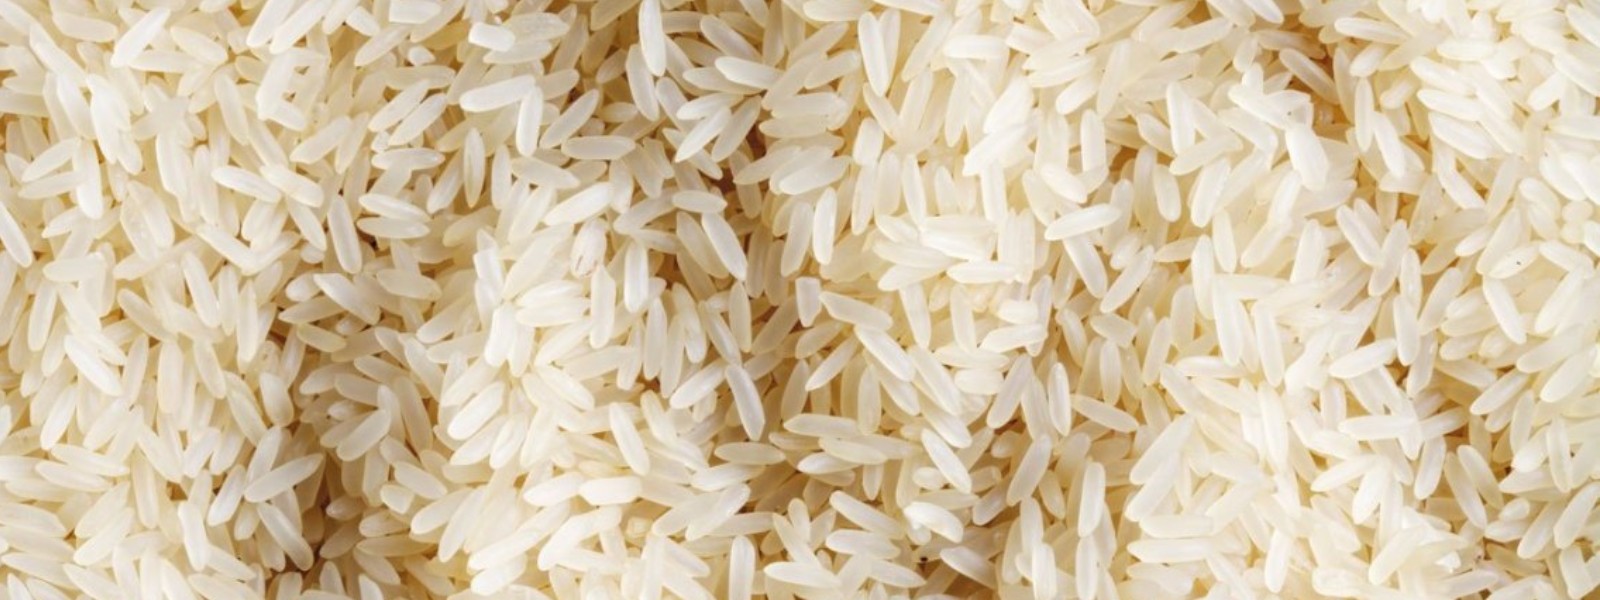 Cabinet green light to import 20,000 MT of rice from Myanmar